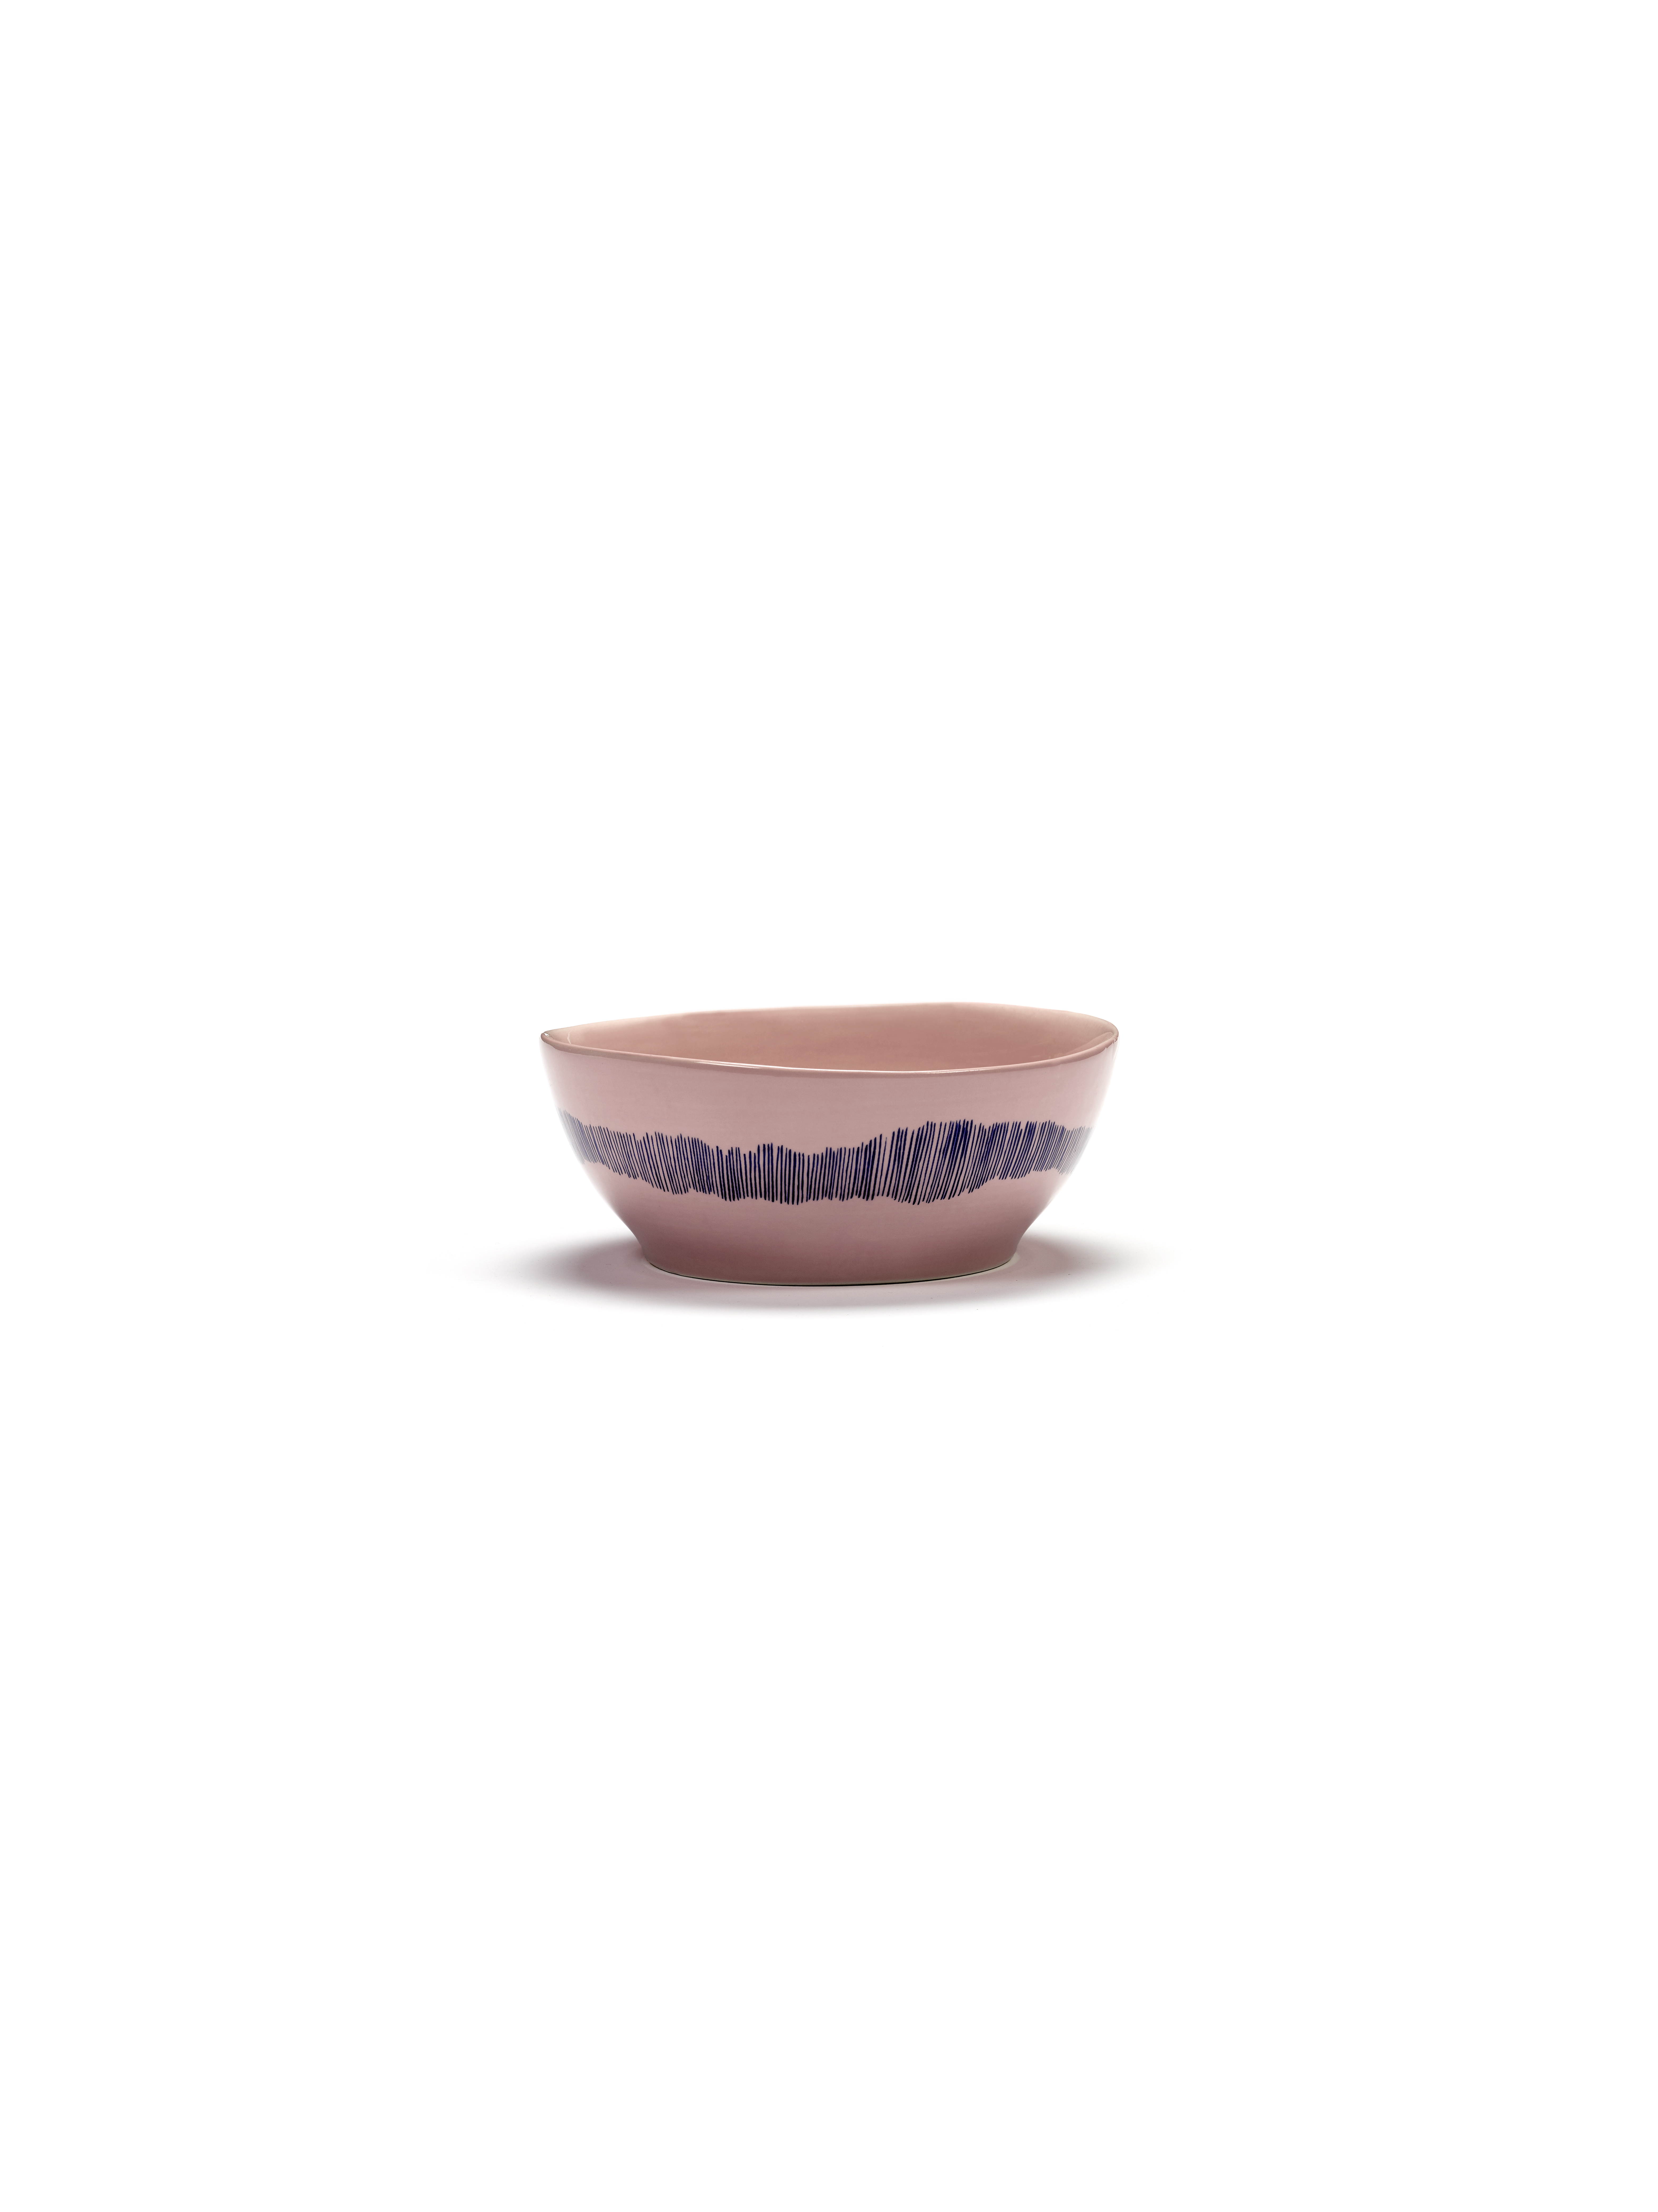 serax-ottolenghi-set-of-4-feast-bowls-in-delicious-pink